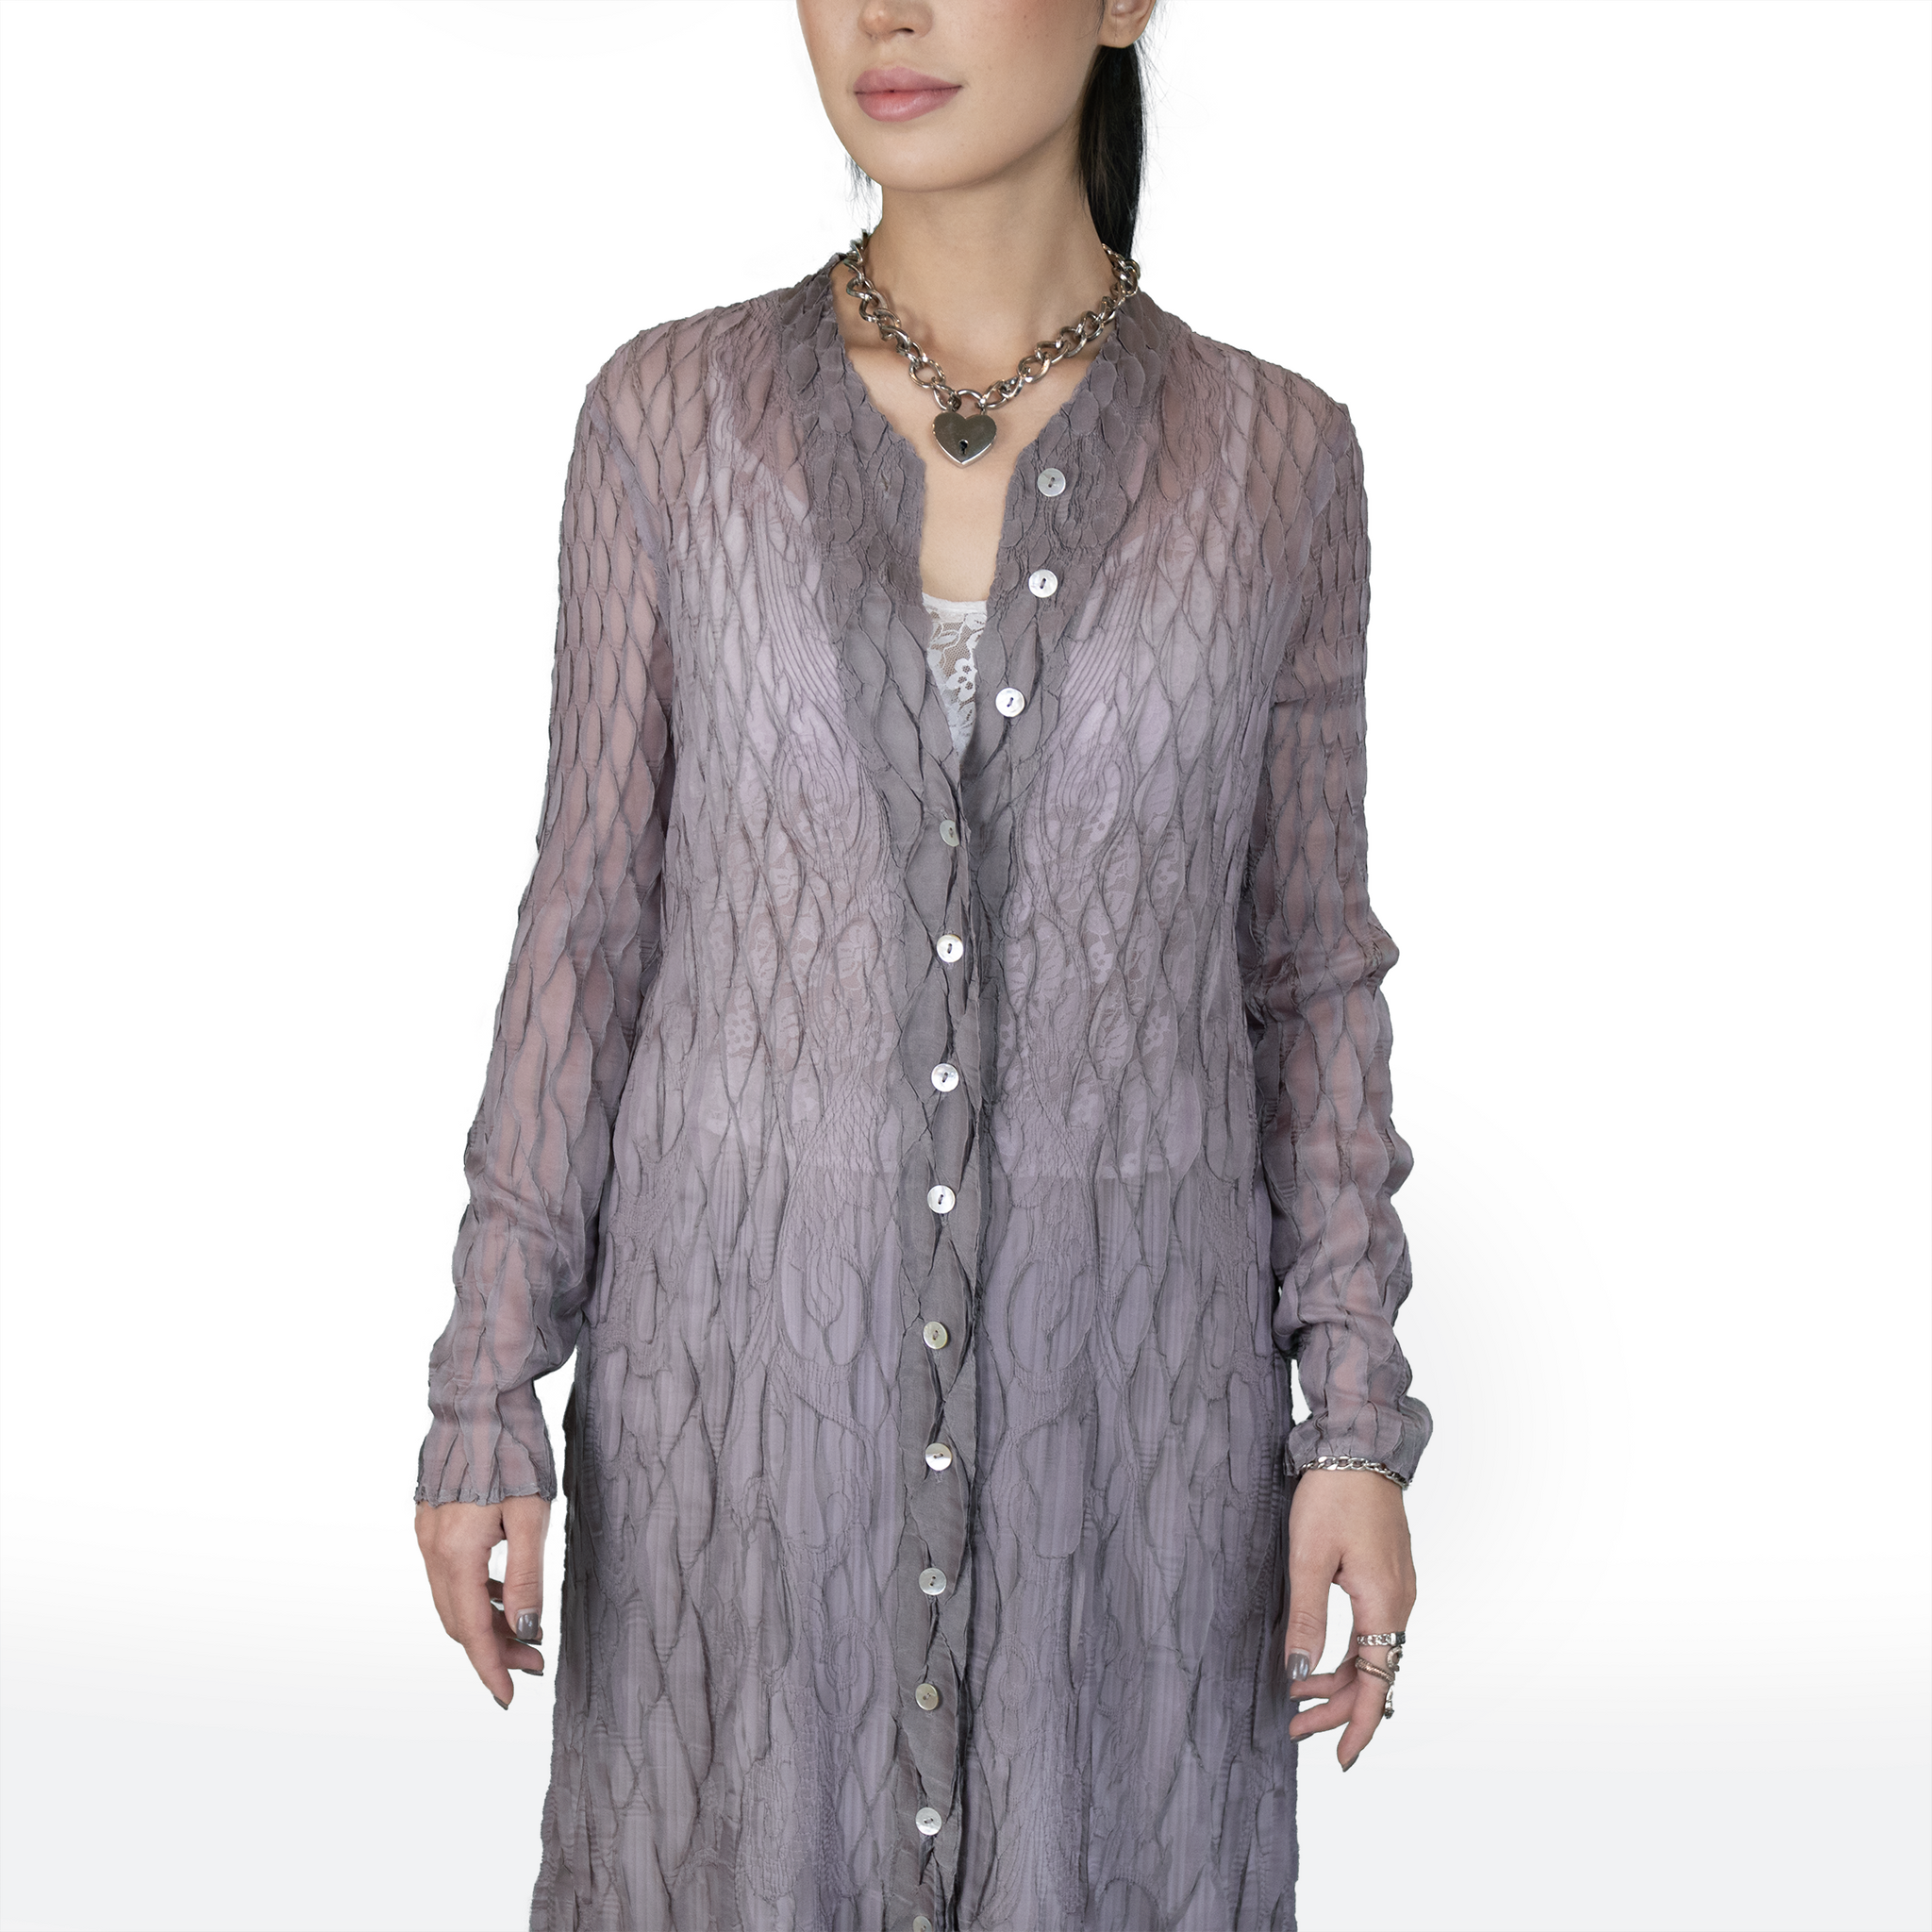 Diamond grid textured button-up ethereal coat